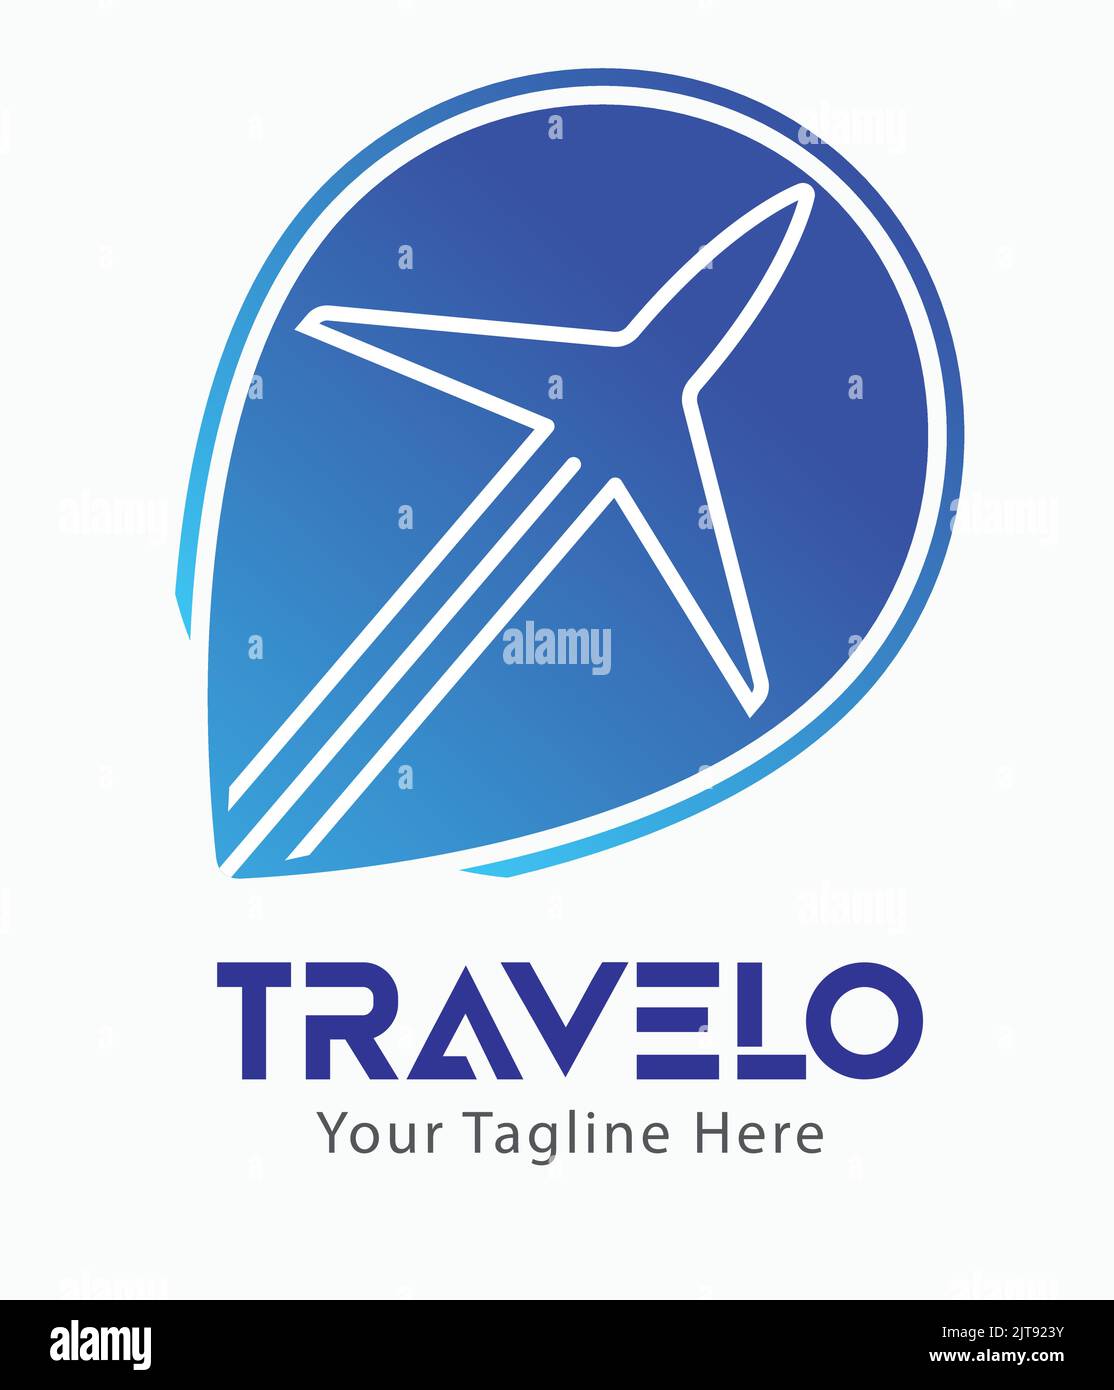 travel company logo with location icon symbol vector logo airplane sky  travelling in vacation tourism business logo fly illustration worldwide Stock Vector